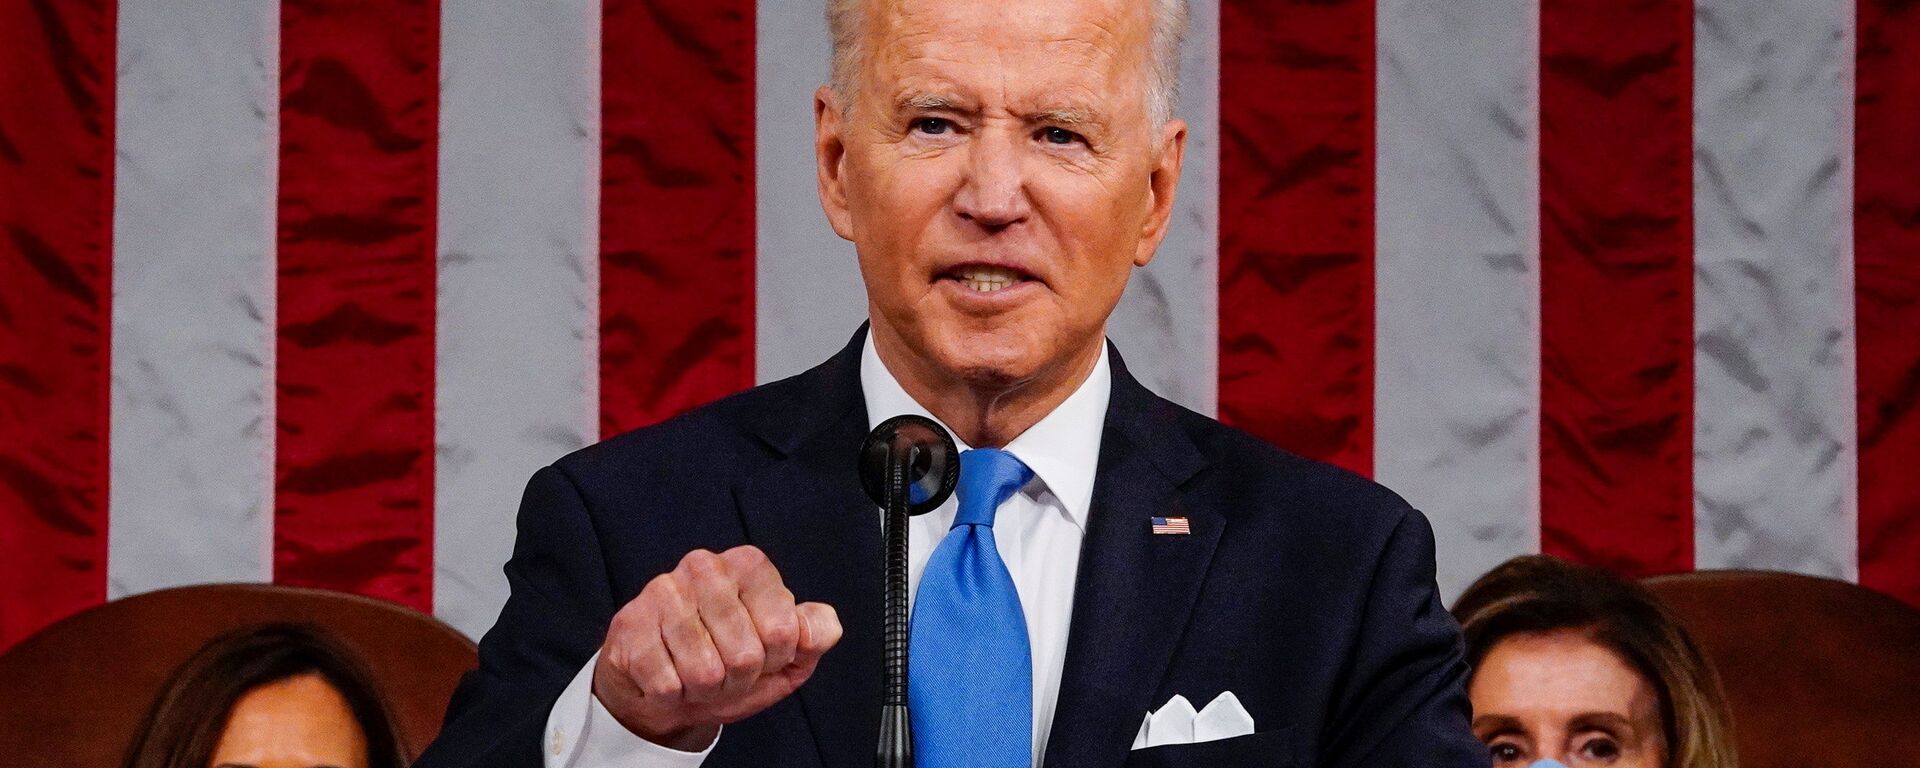 US President Joe Biden addresses to a joint session of Congress in the House chamber of the US Capitol in Washington, US, April 28, 2021 - Sputnik International, 1920, 15.05.2021